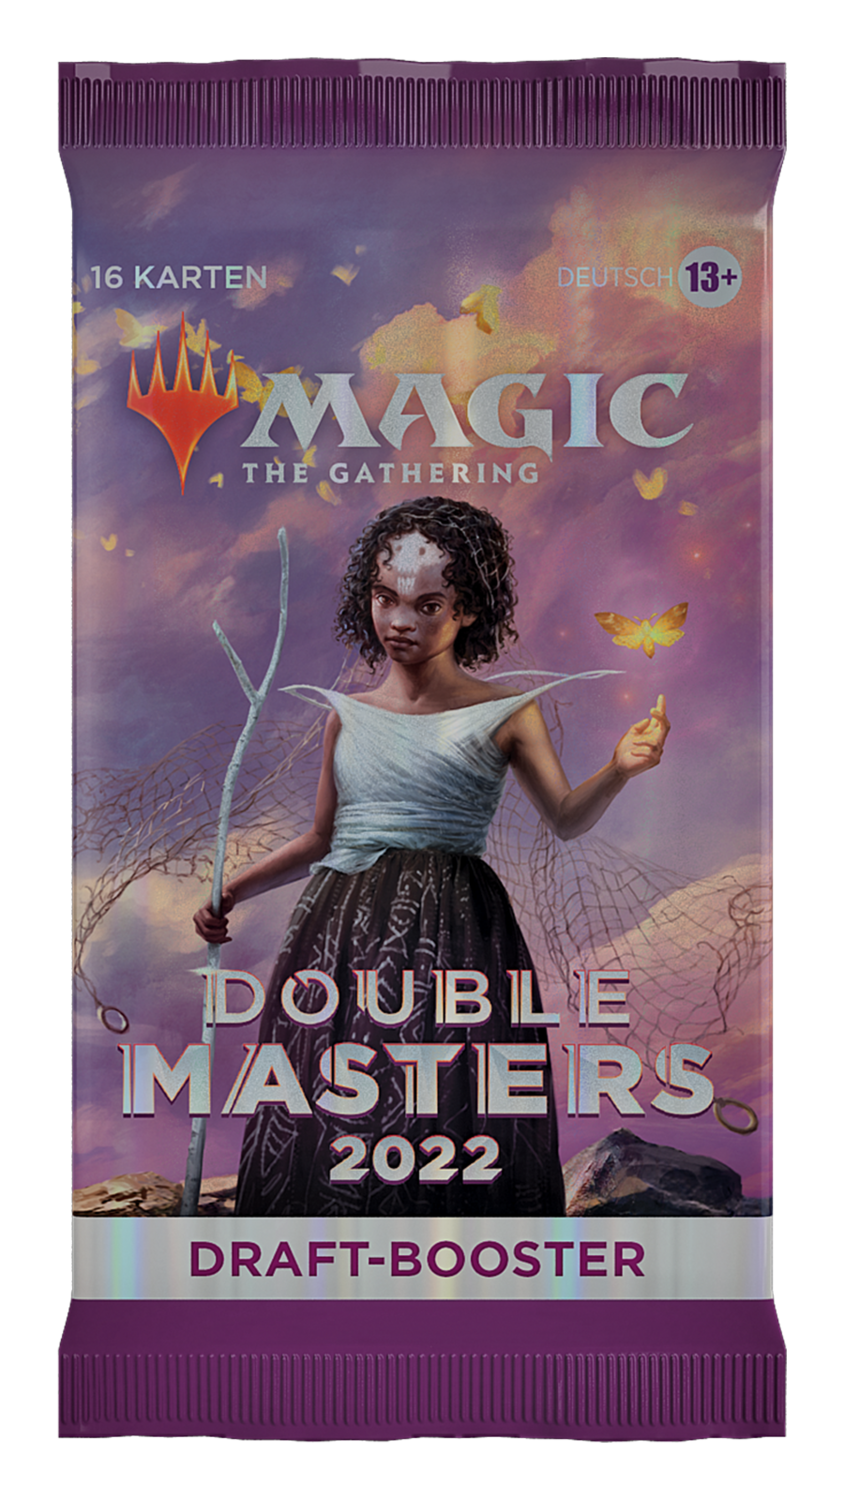 Magic: Double Master 2022 - Draft Booster